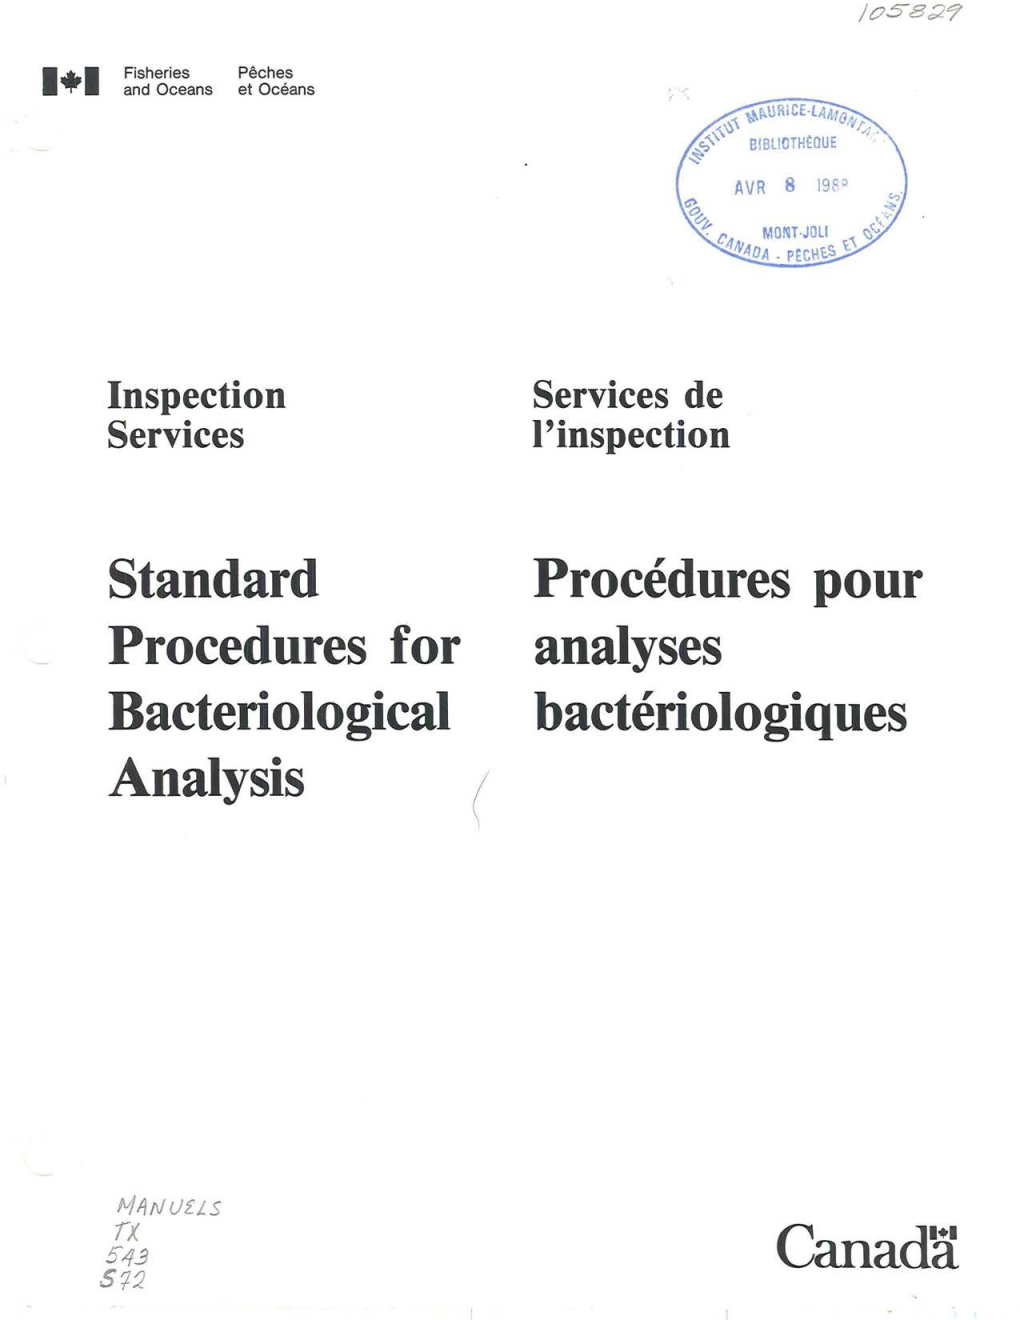 Canada 57-2 Fisheries Peches L+I and Oceans Et Oceans STANDARD PROCEDURES PROCEDURES POUR for BACTERIOLOGICAL ANALYSES ANALYSIS BACTERIOLOGIQUES